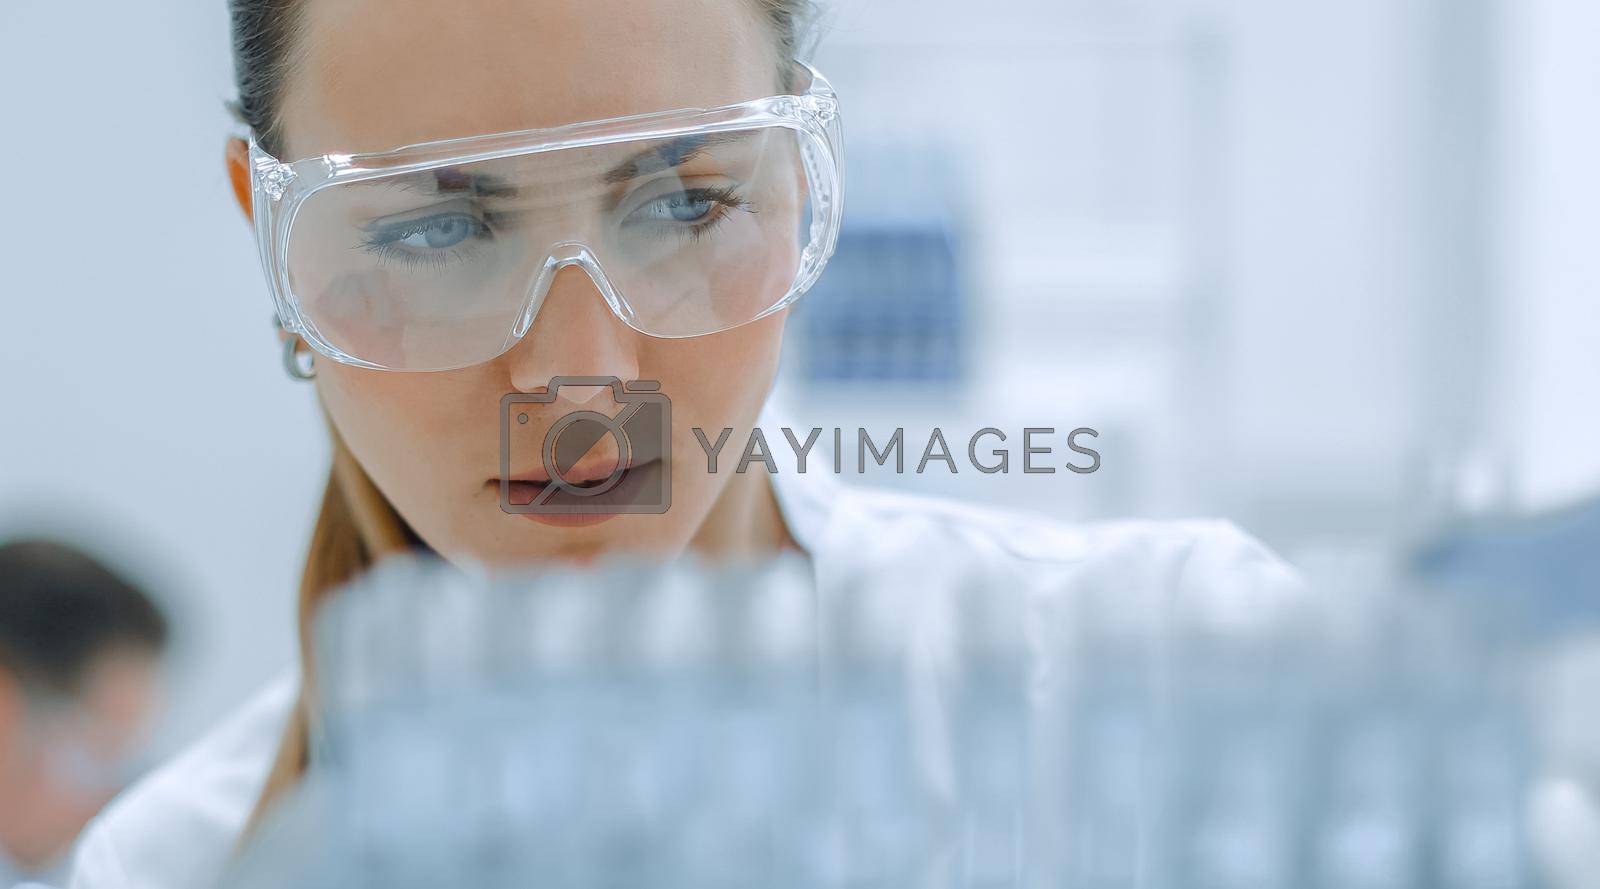 Royalty free image of Test tube in scientist hand in laboratory by asdf